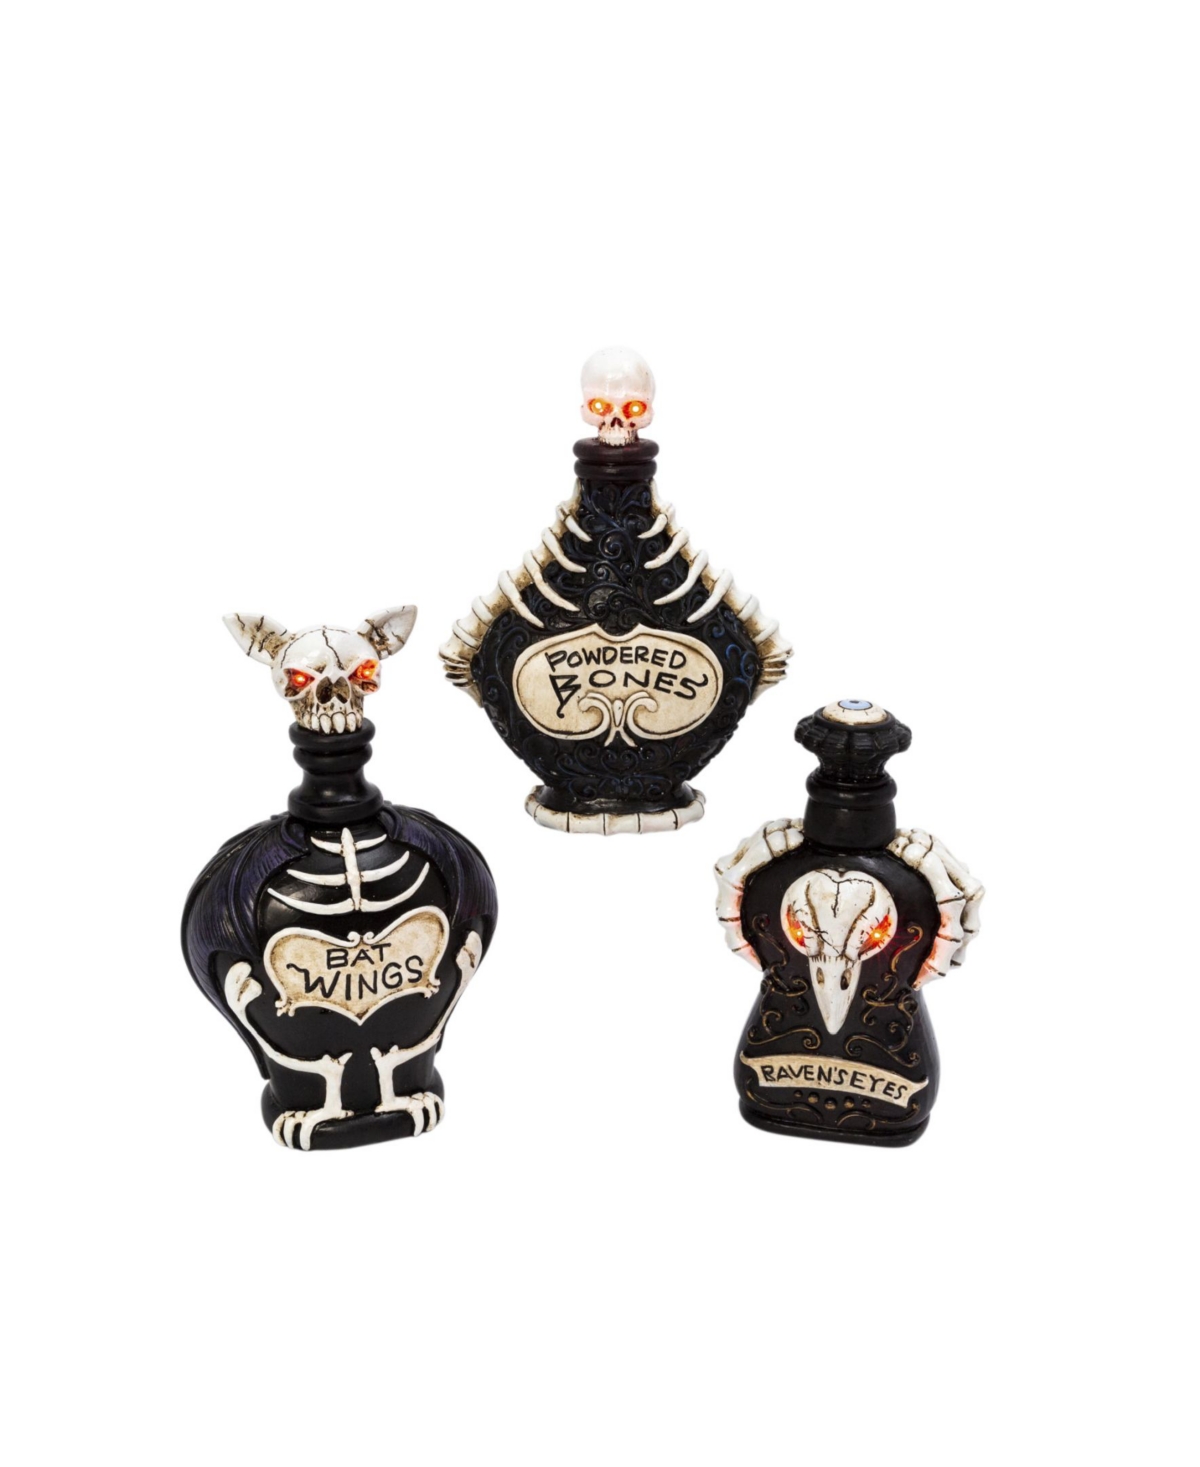 Battery Operated Lighted Halloween Potion Bottles Set, 3 Pieces - Black